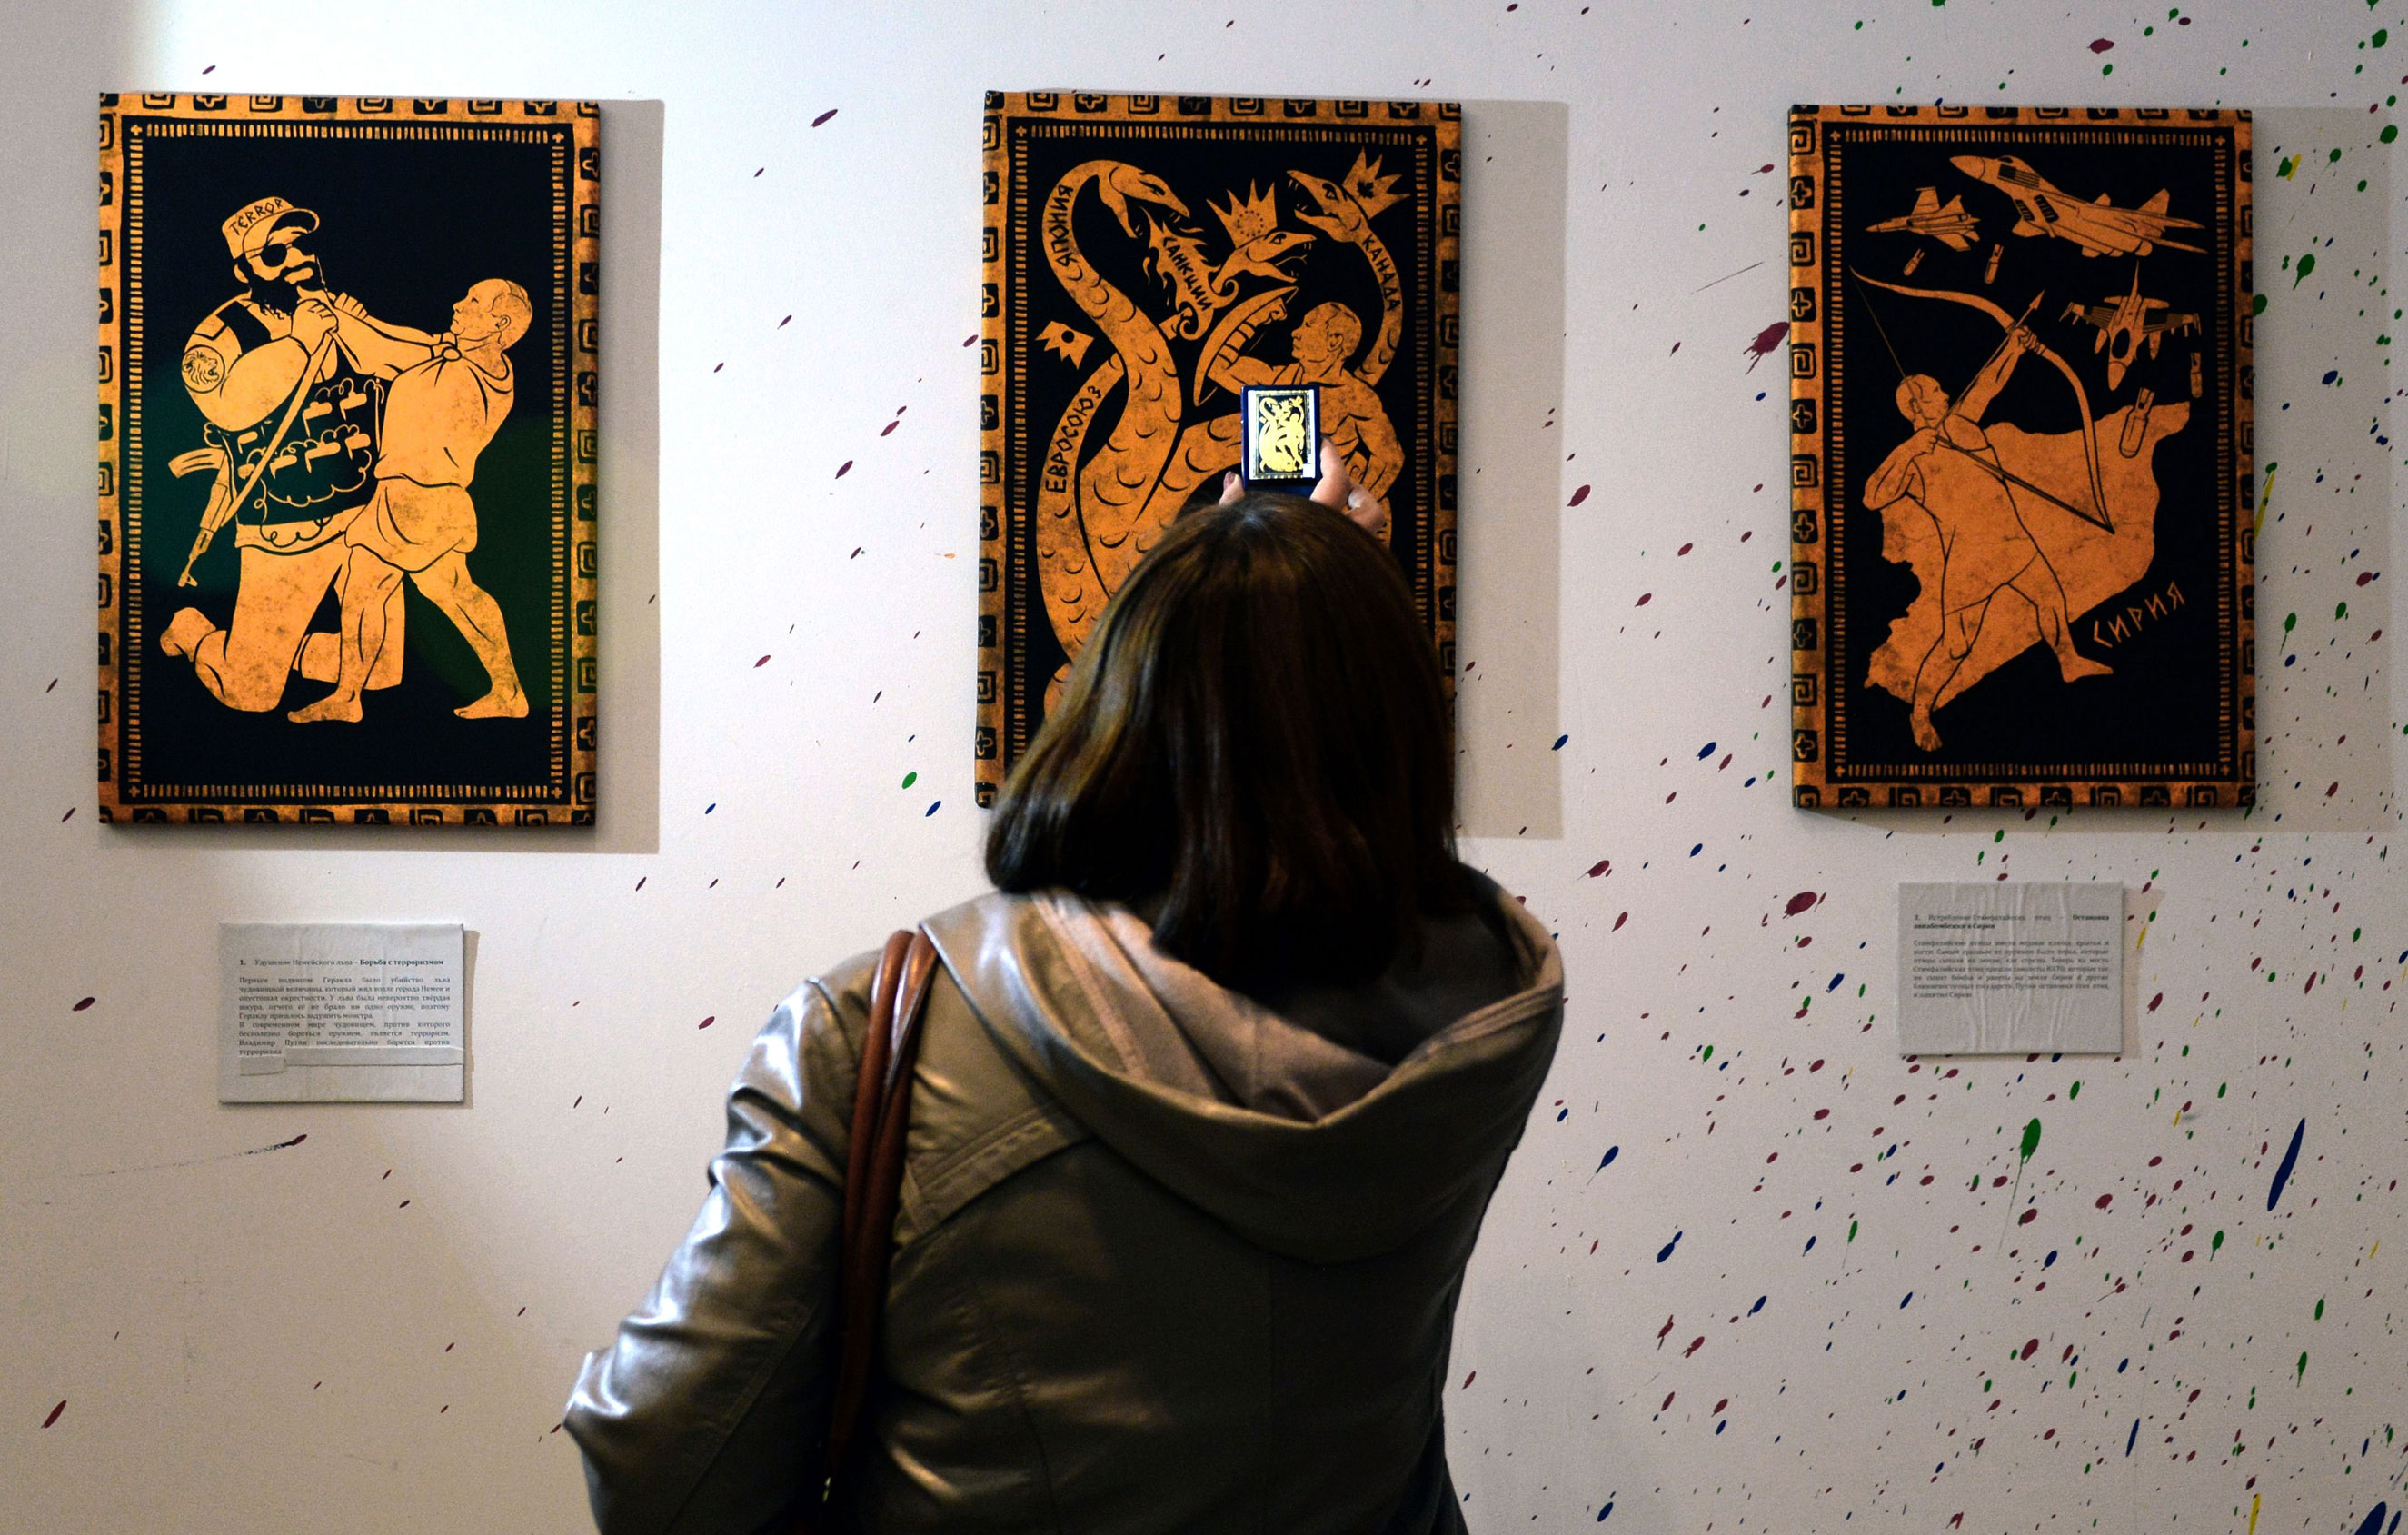 A visitor takes photos of the paintings during the "12 Labours of Putin" art exhibition on Oct. 6, 2014 marking the 60th birthday of Russia's President Vladimir Putin at the design workshop in Moscow.